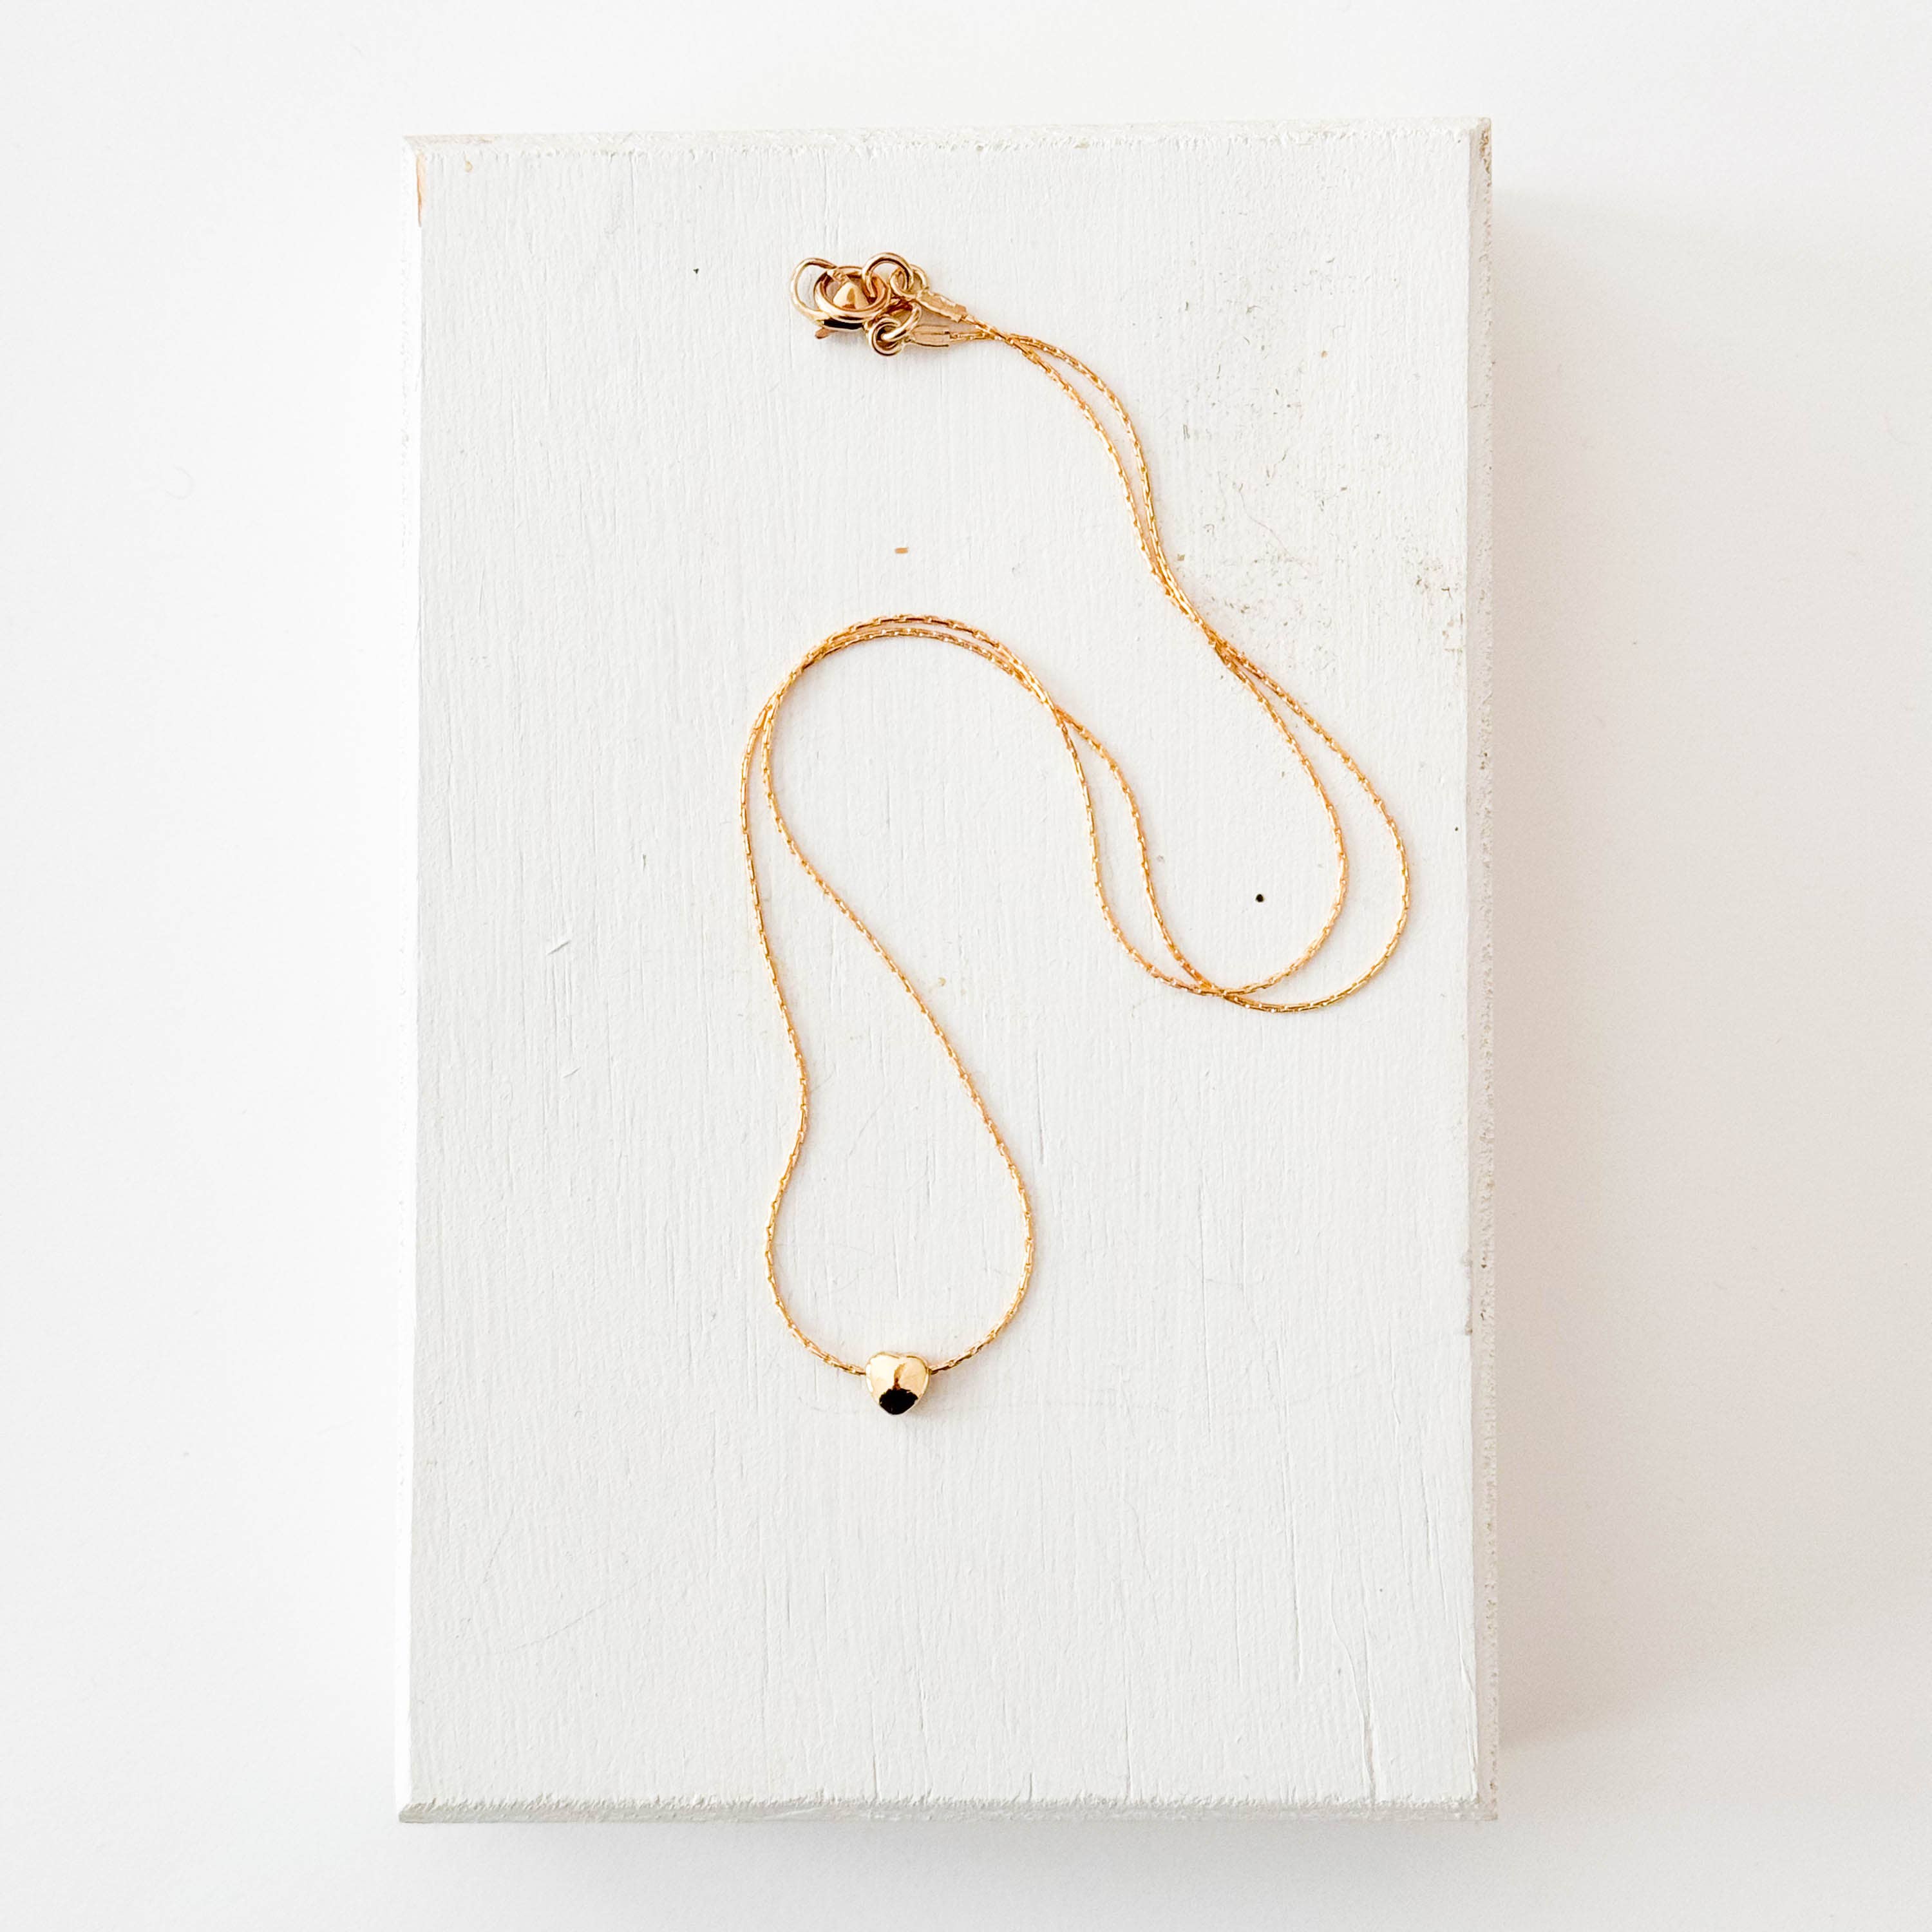 Nest Pretty Things - Tiny Gold  Filled Heart Charm Necklace